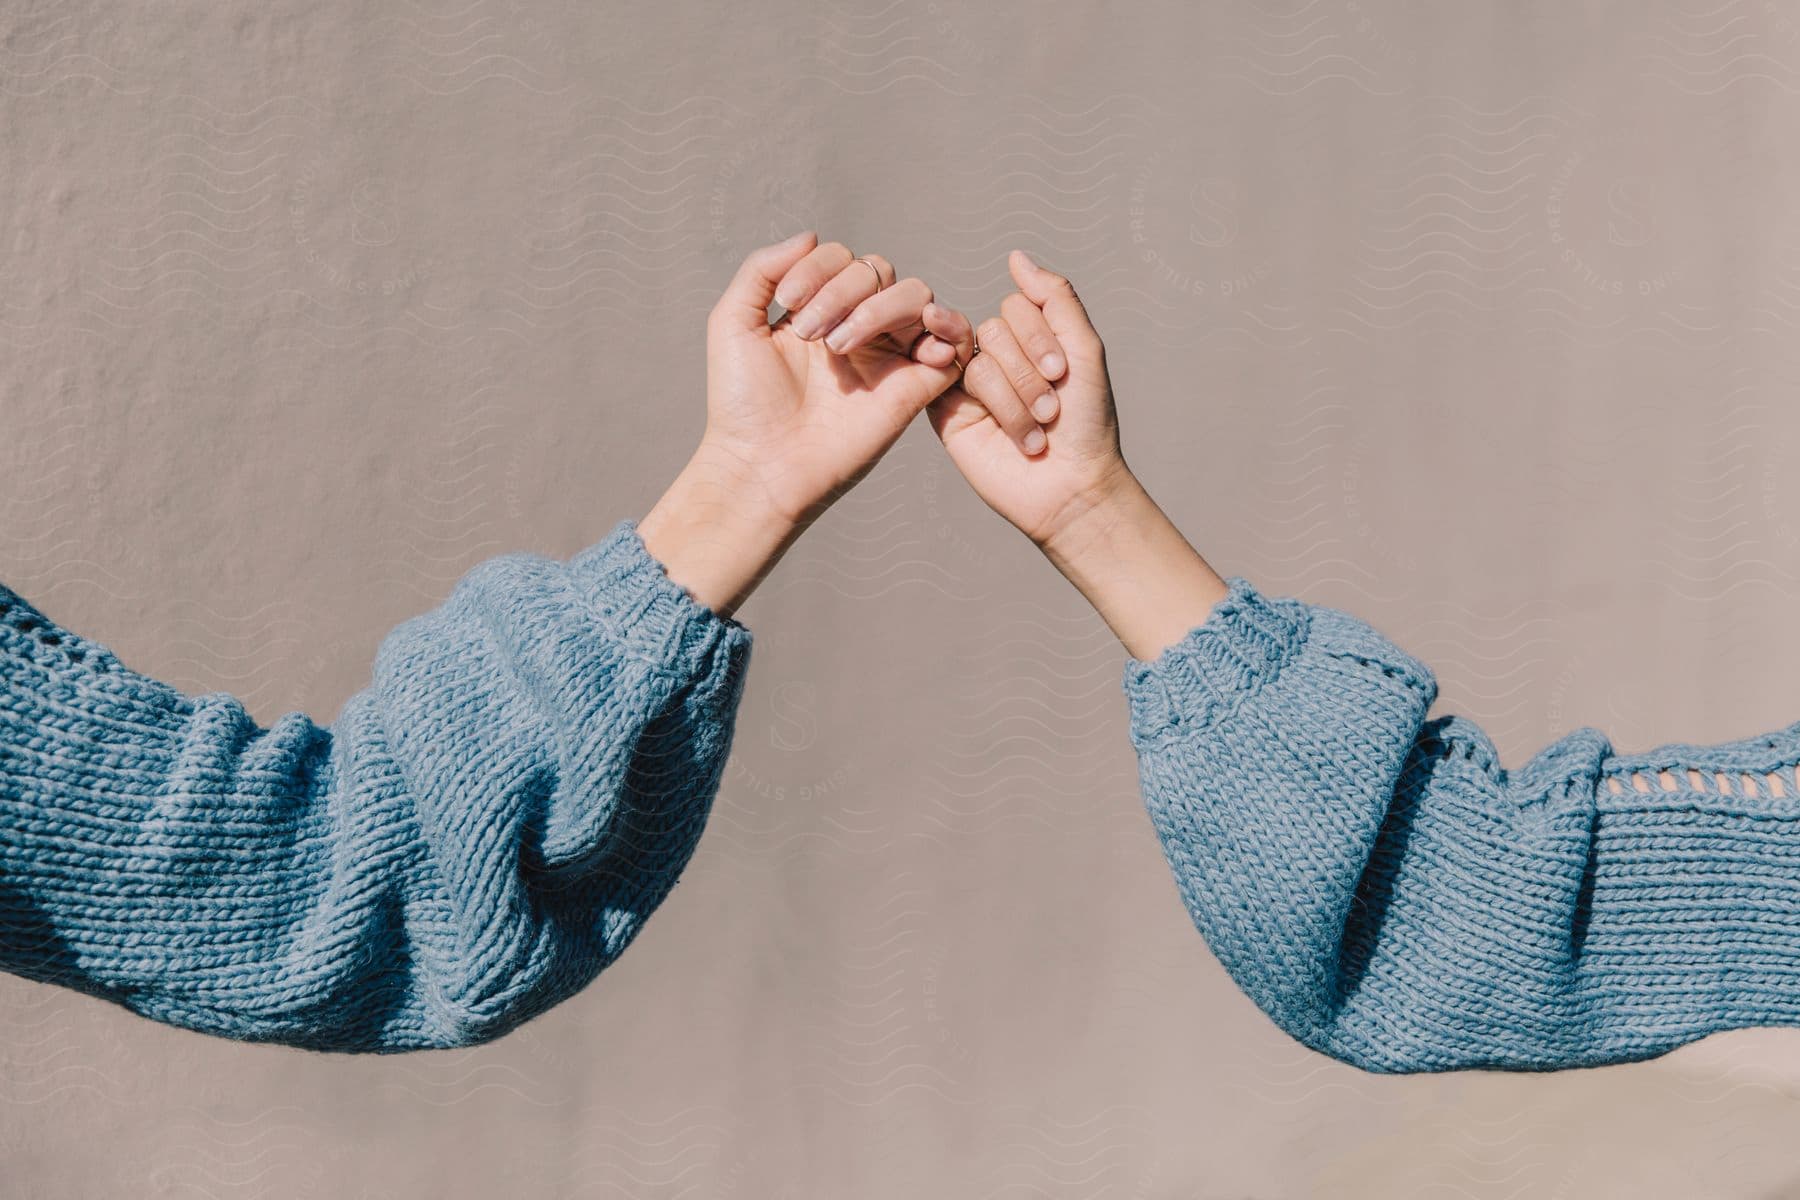 Two people wearing similarly detailed sweaters hook pinkies together.